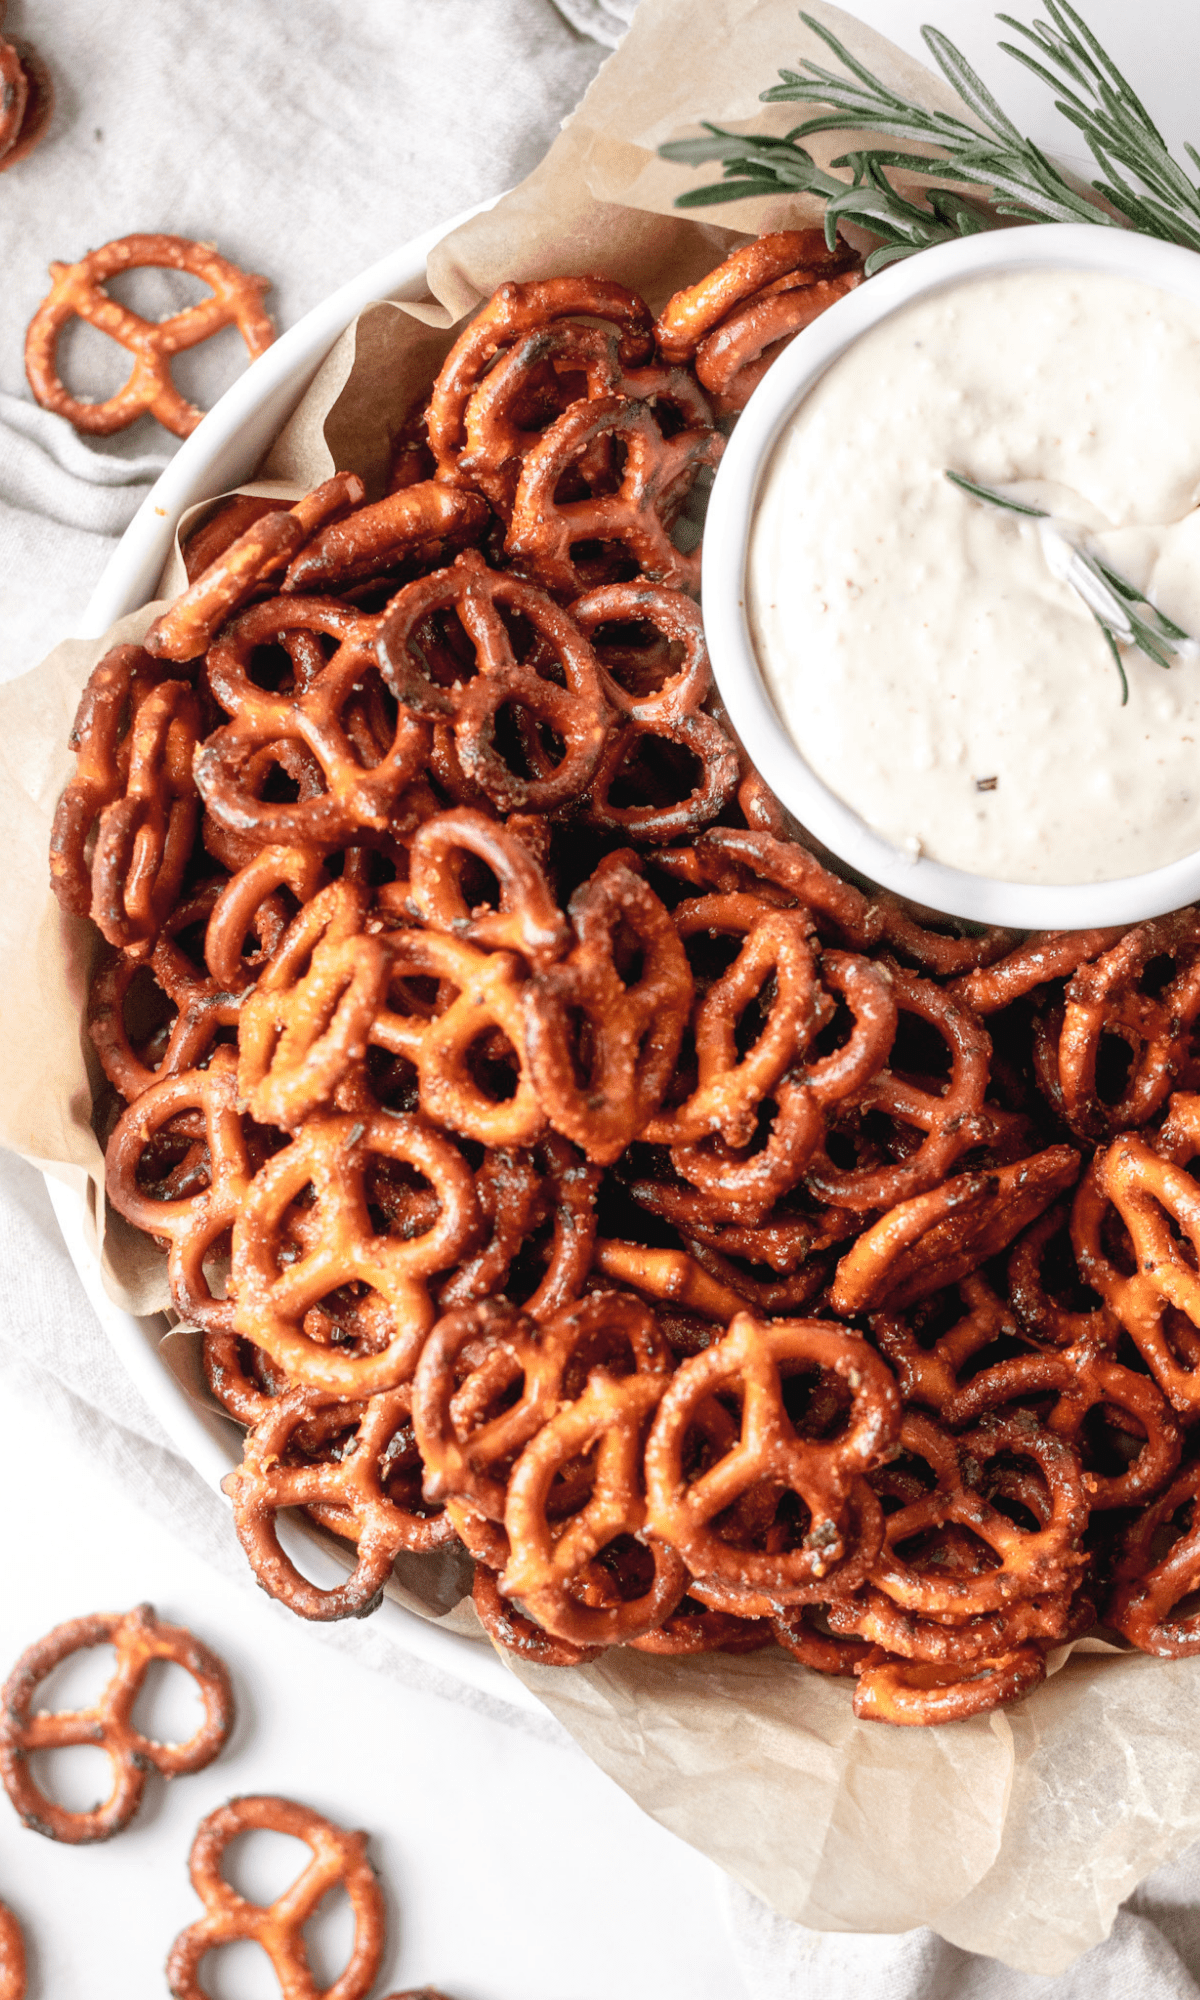 Overhead shot of pretzels with dipping sauce.